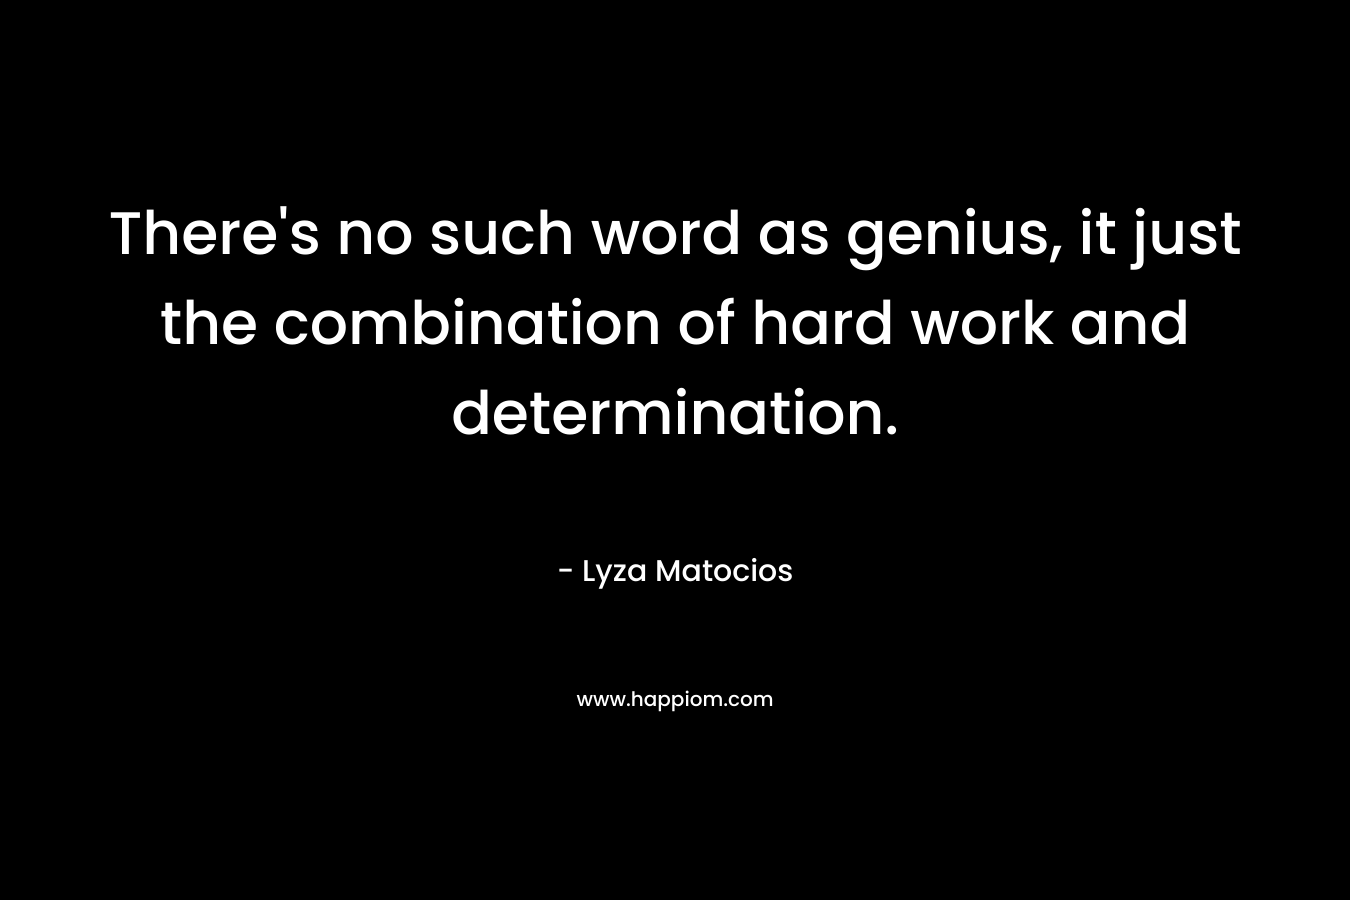 There's no such word as genius, it just the combination of hard work and determination.